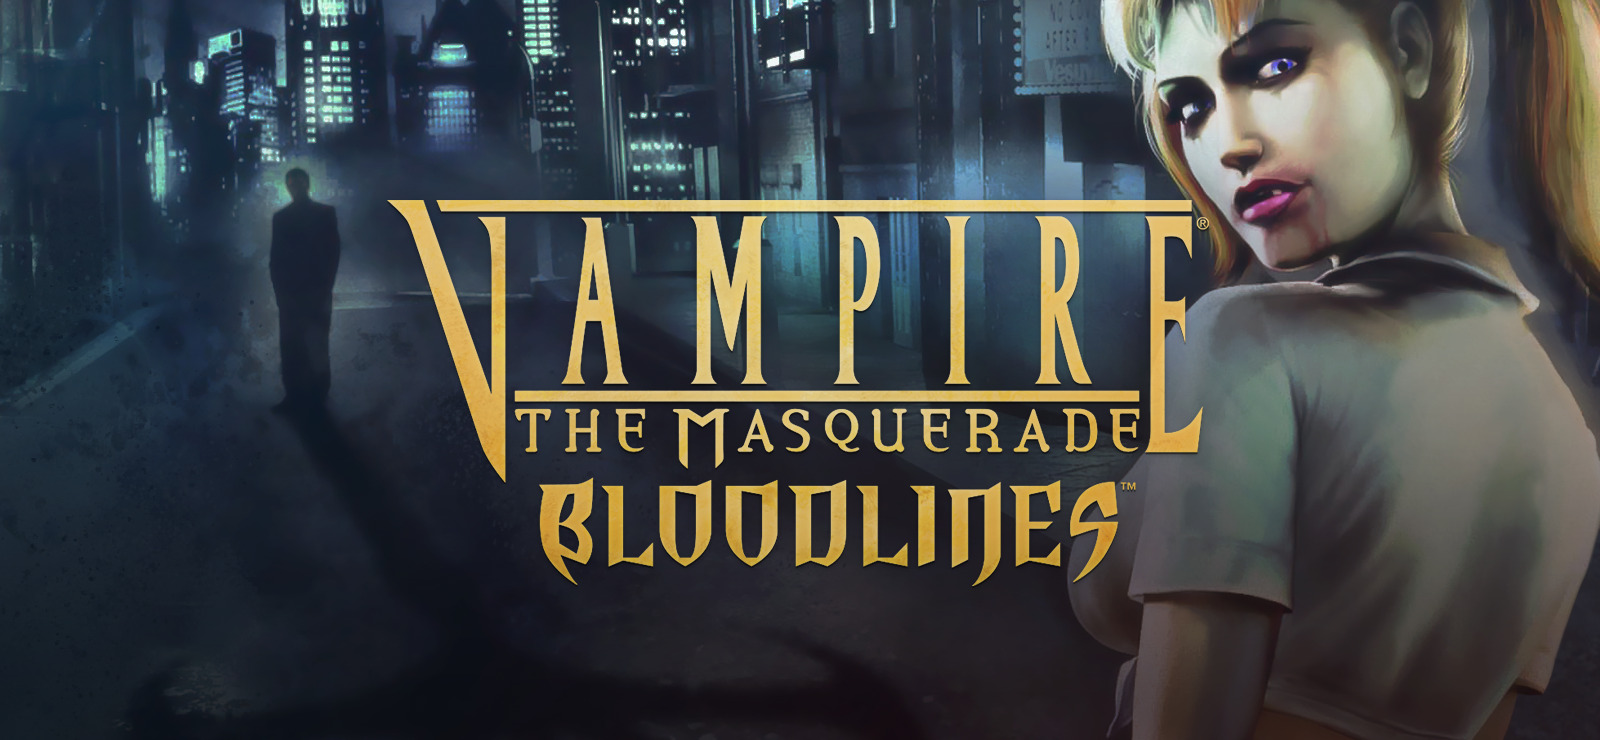 The head games of Vampire: The Masquerade - Bloodlines